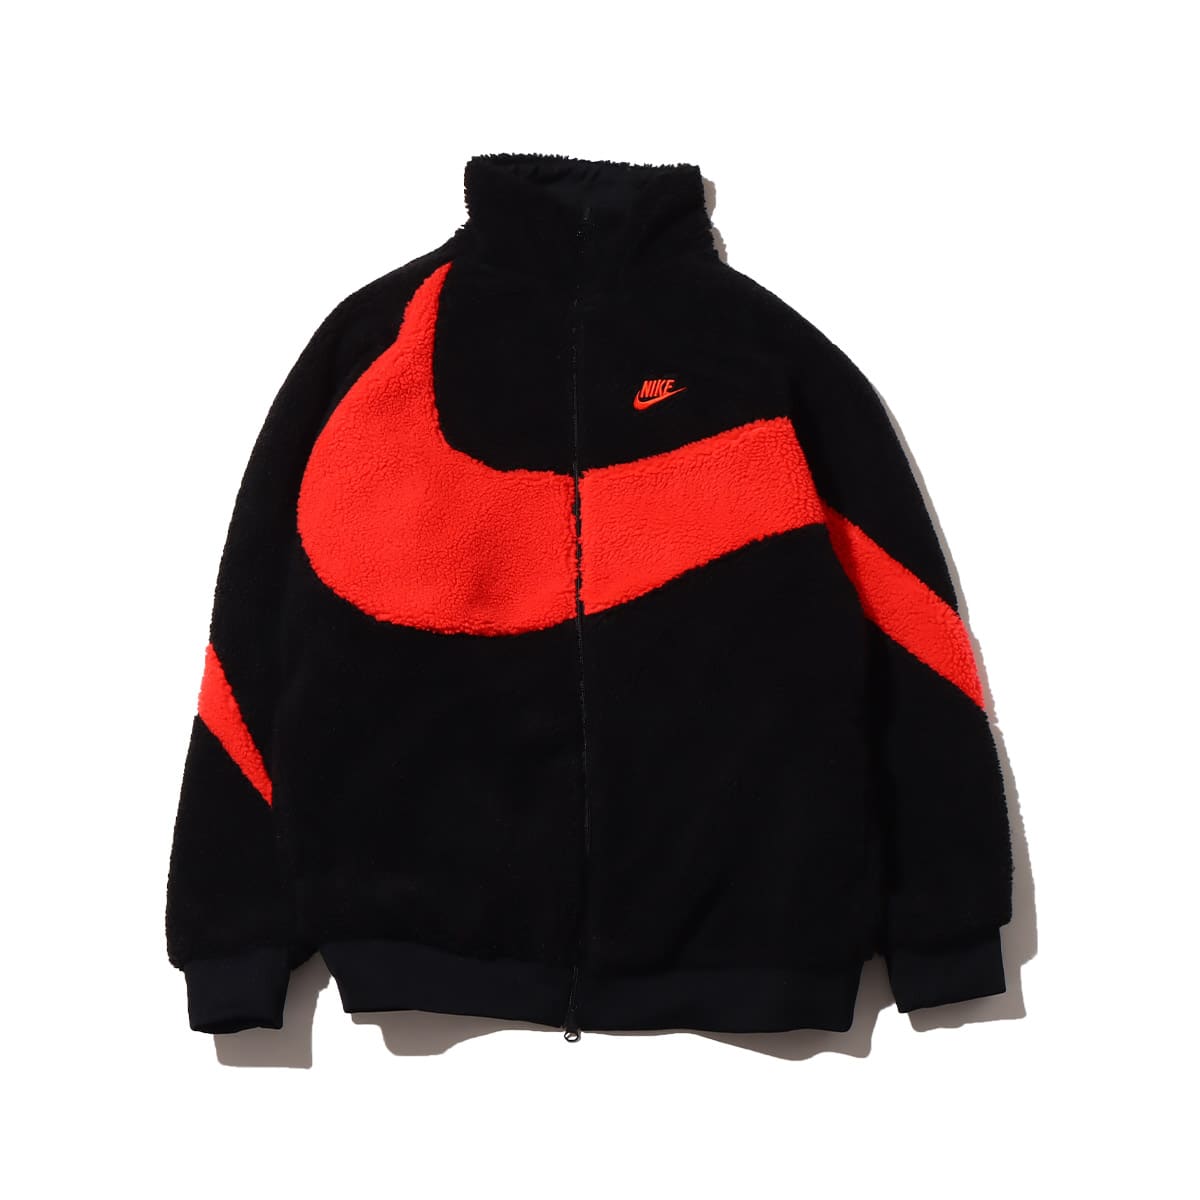 NIKE AS M NSW VW SWSH FULL ZIP JKT BLACK/CHILE RED/BLACK/CHILE RED 21HO-I_photo_large